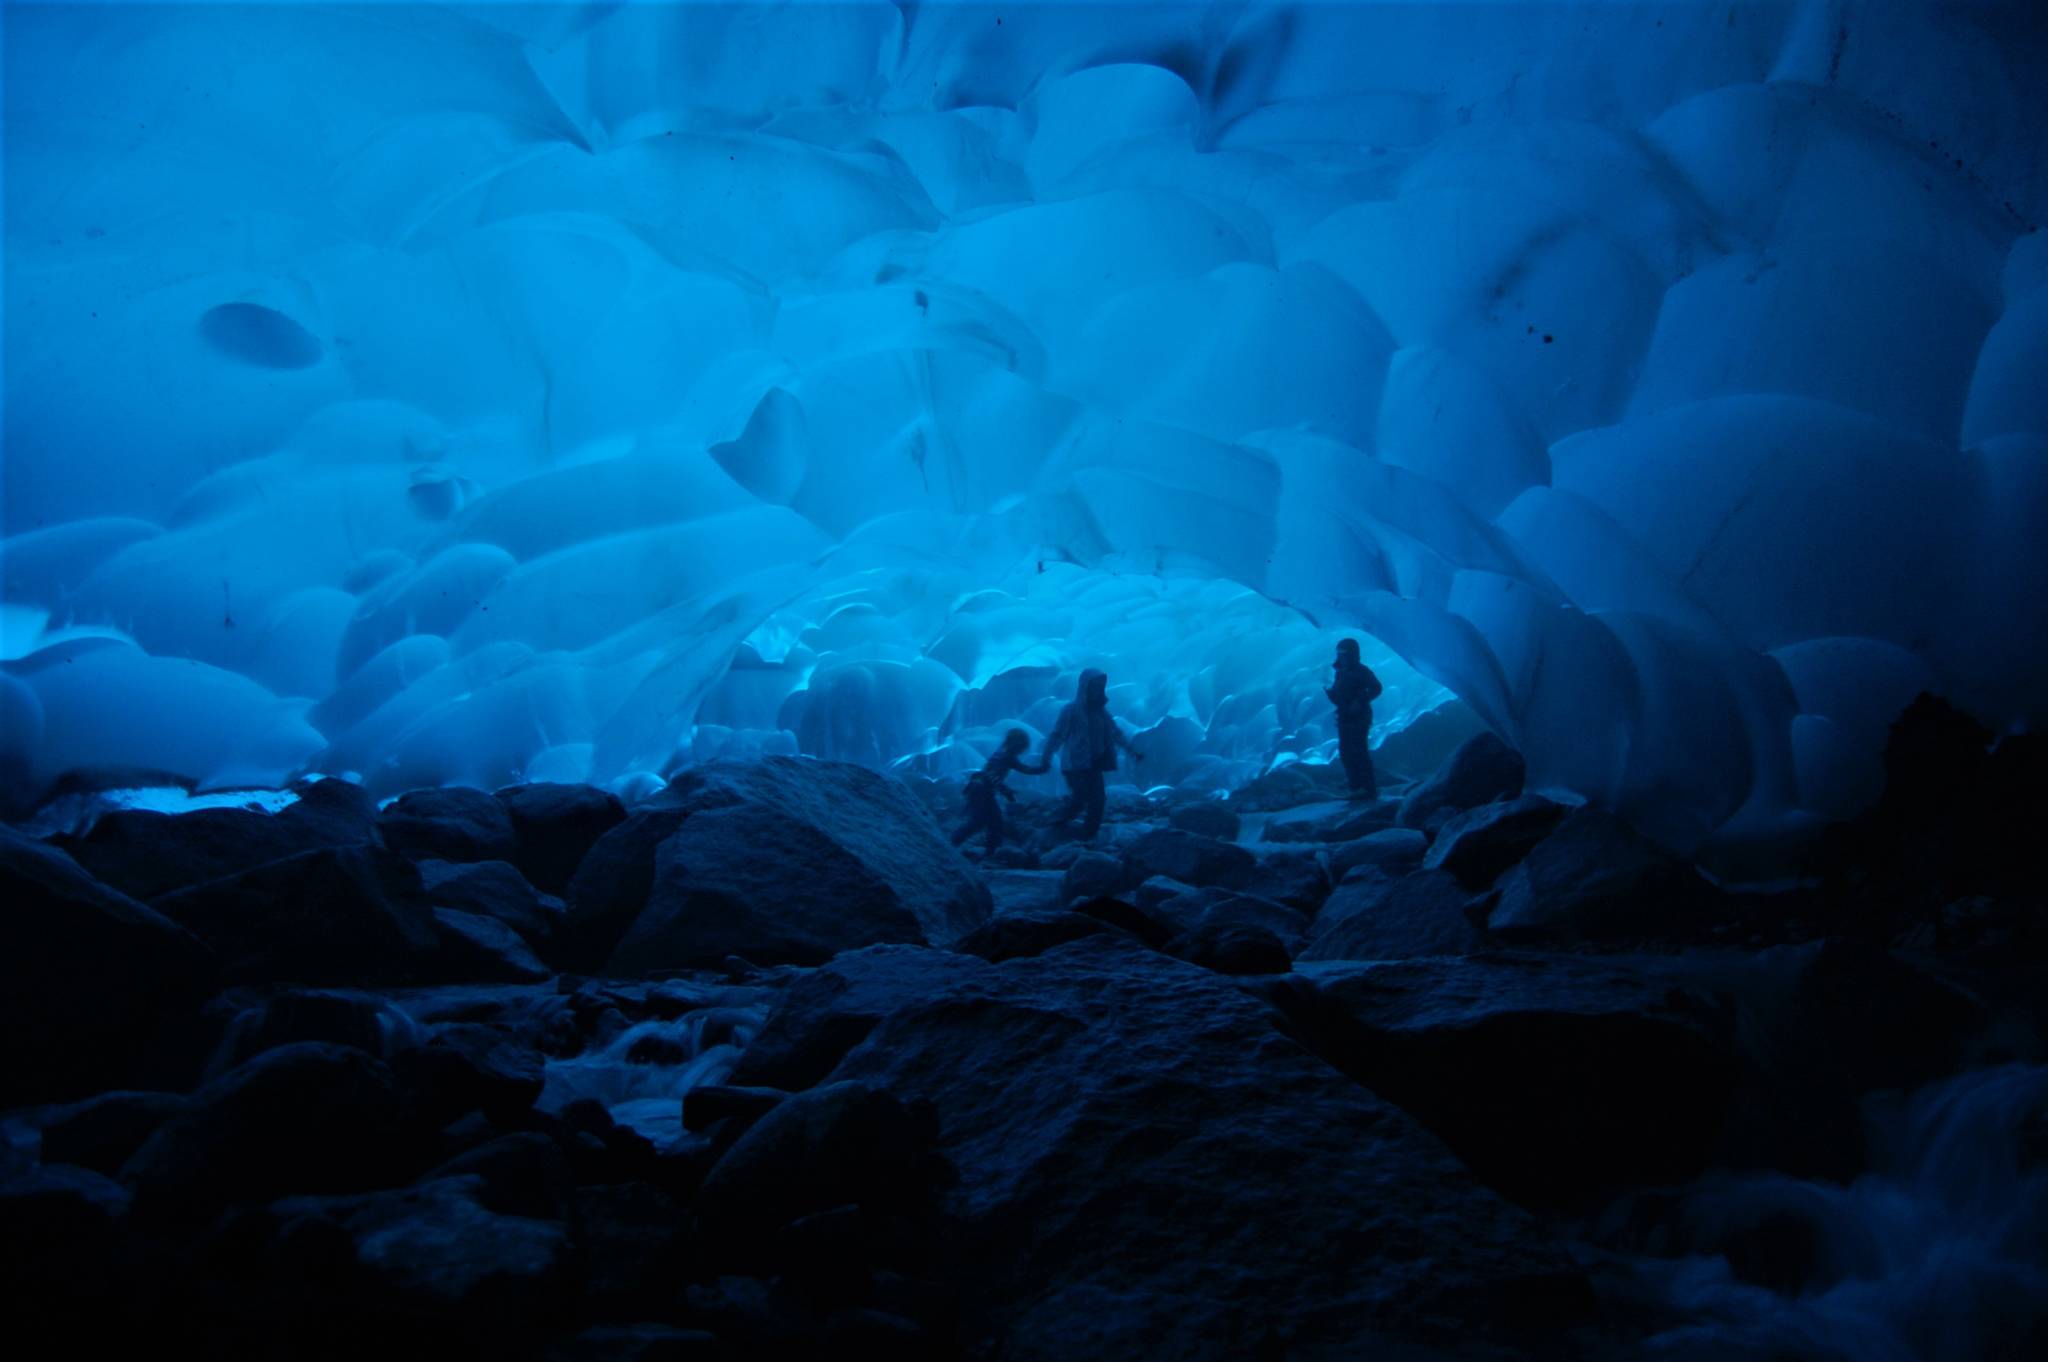 Three intrepid adventurers exploring an ice cave on Mendenhall Glacier in 2012.